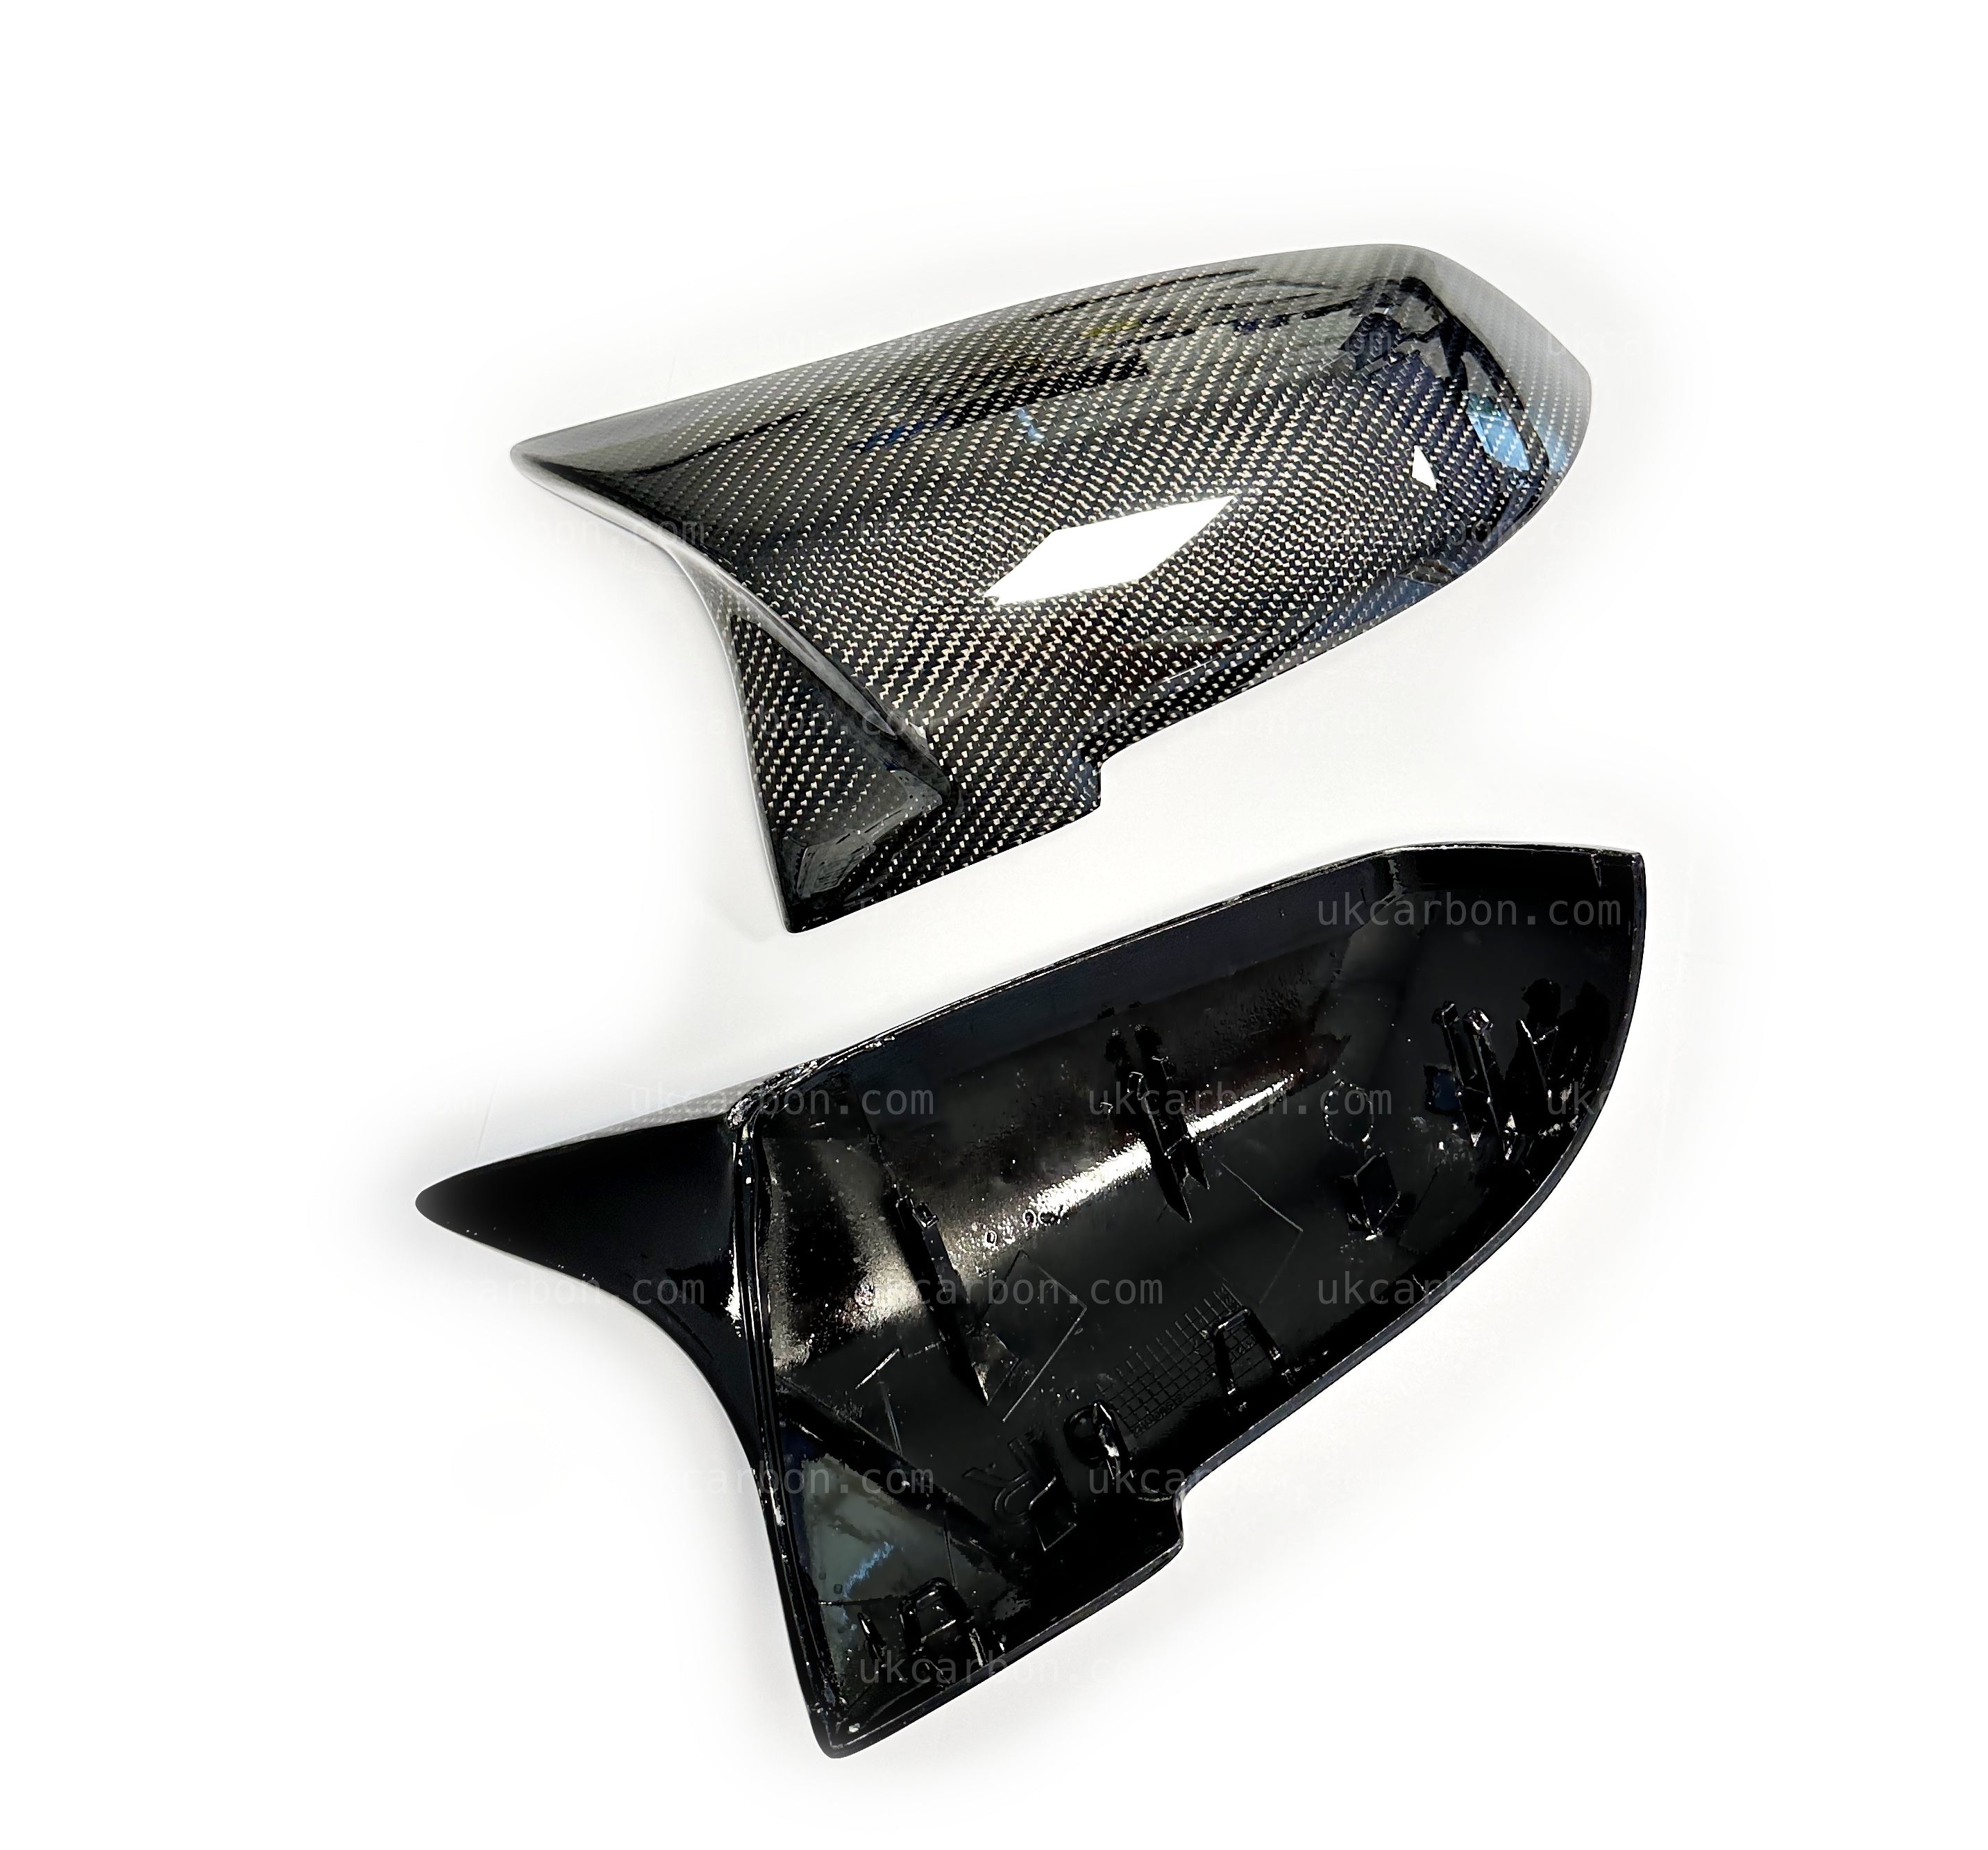 BMW 3 Series Carbon M Style Wing Mirror Cover M Performance F30 F31 by UKCarbon